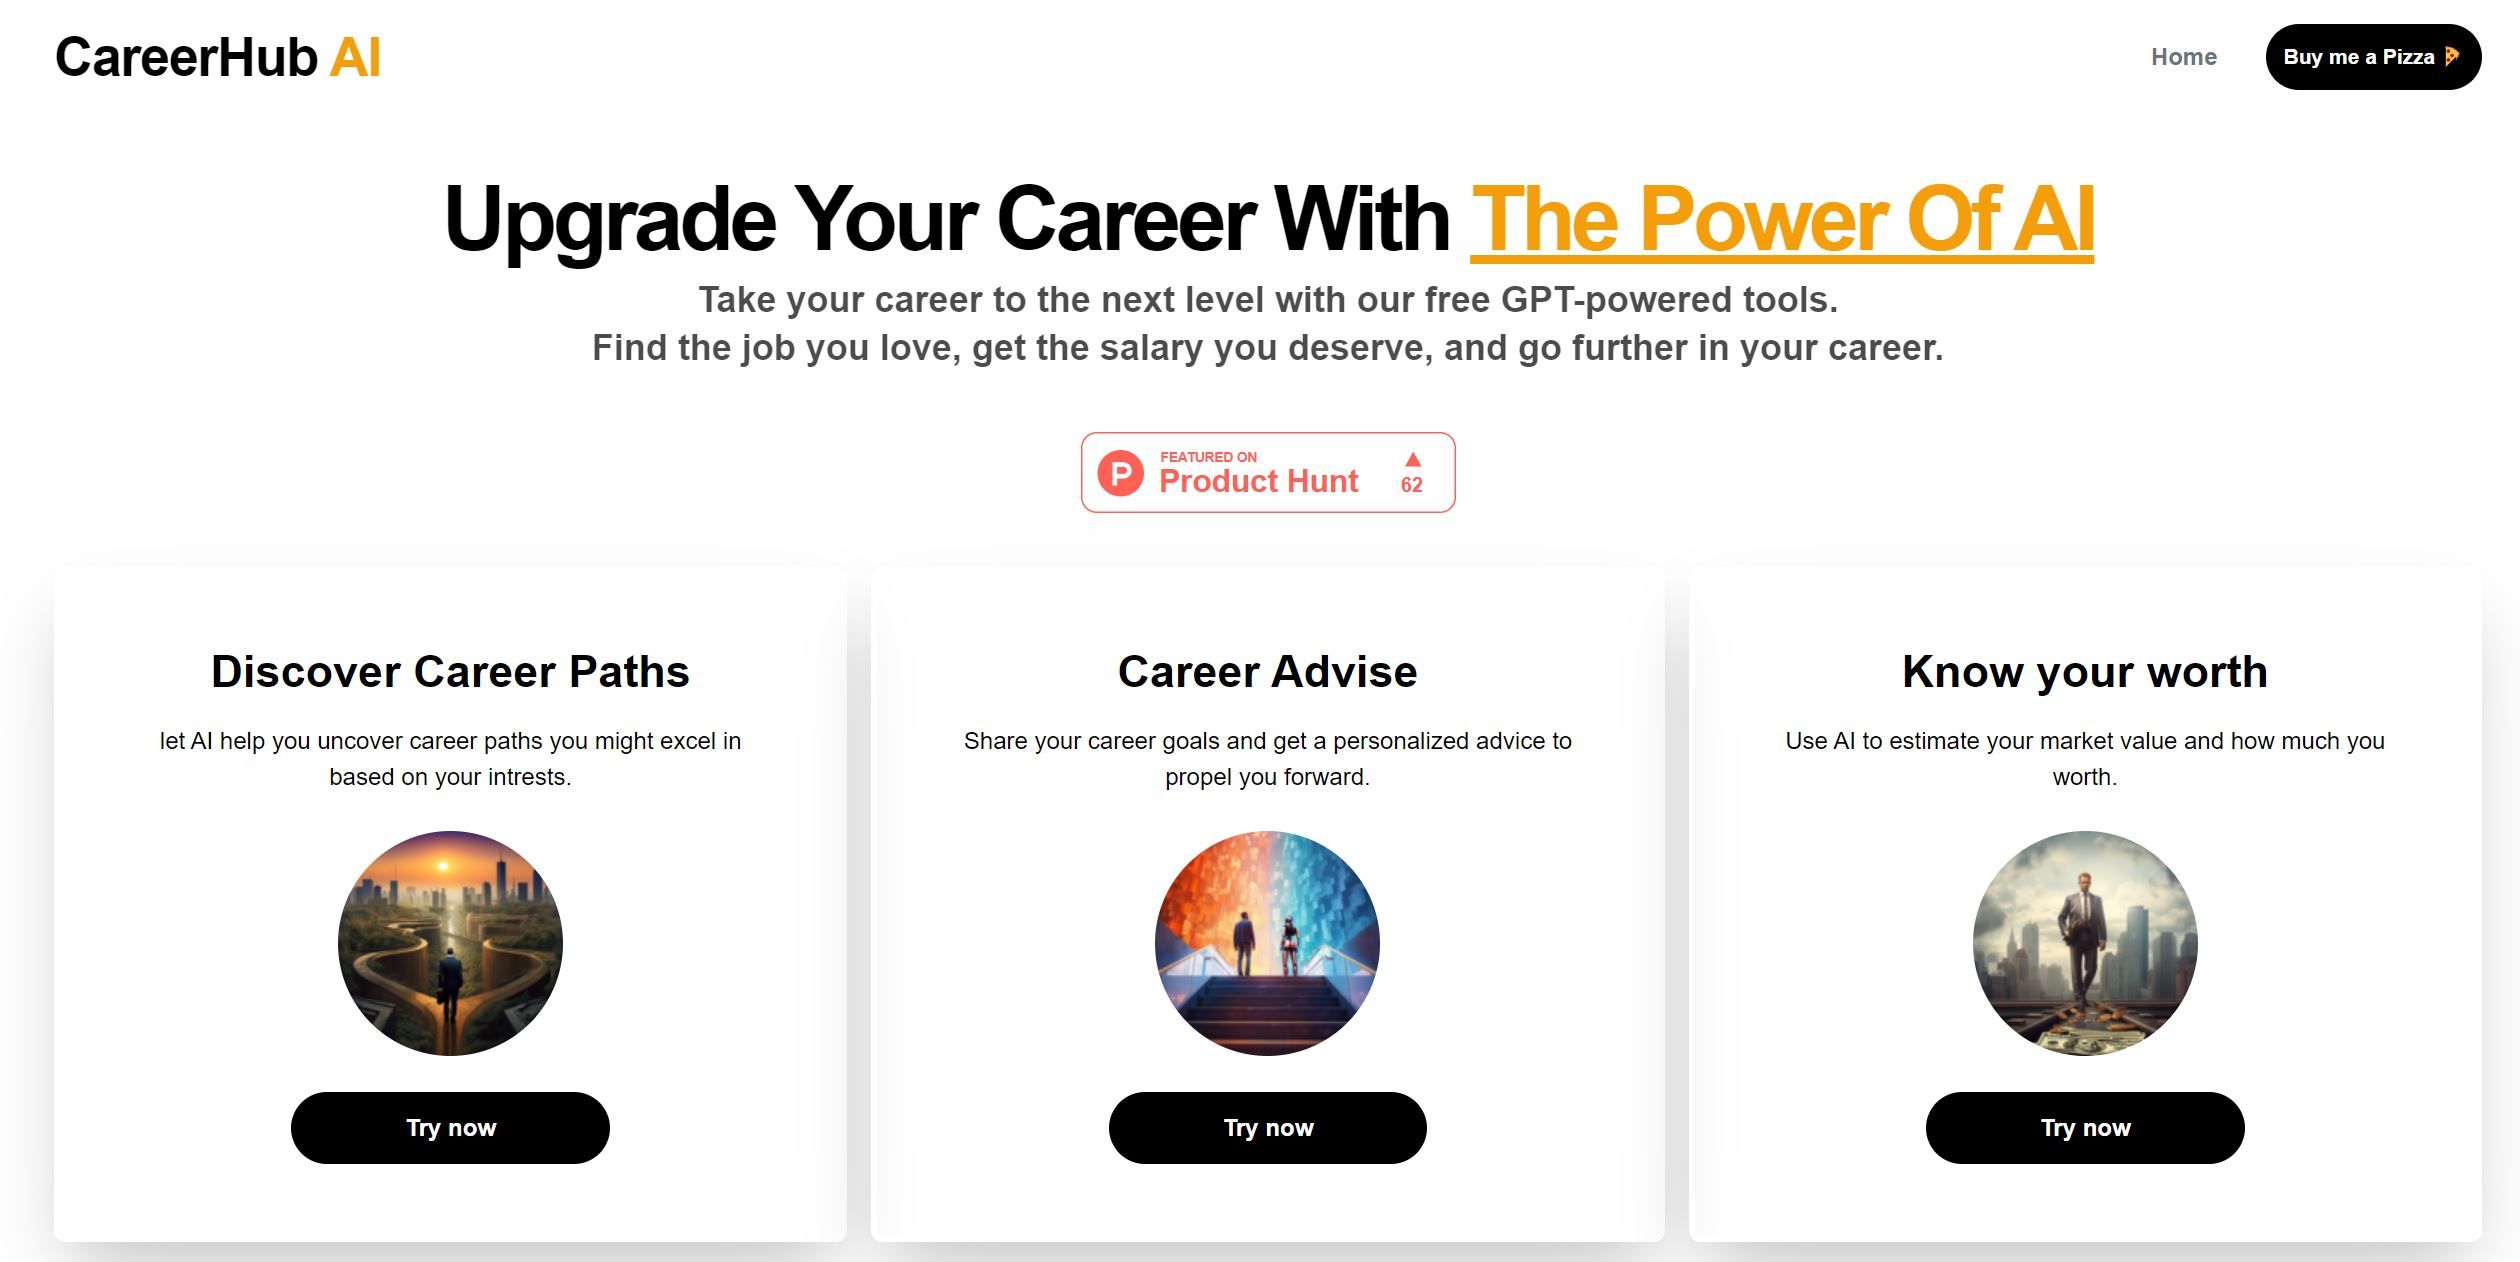  Upgrade Your Career With The Power Of AI